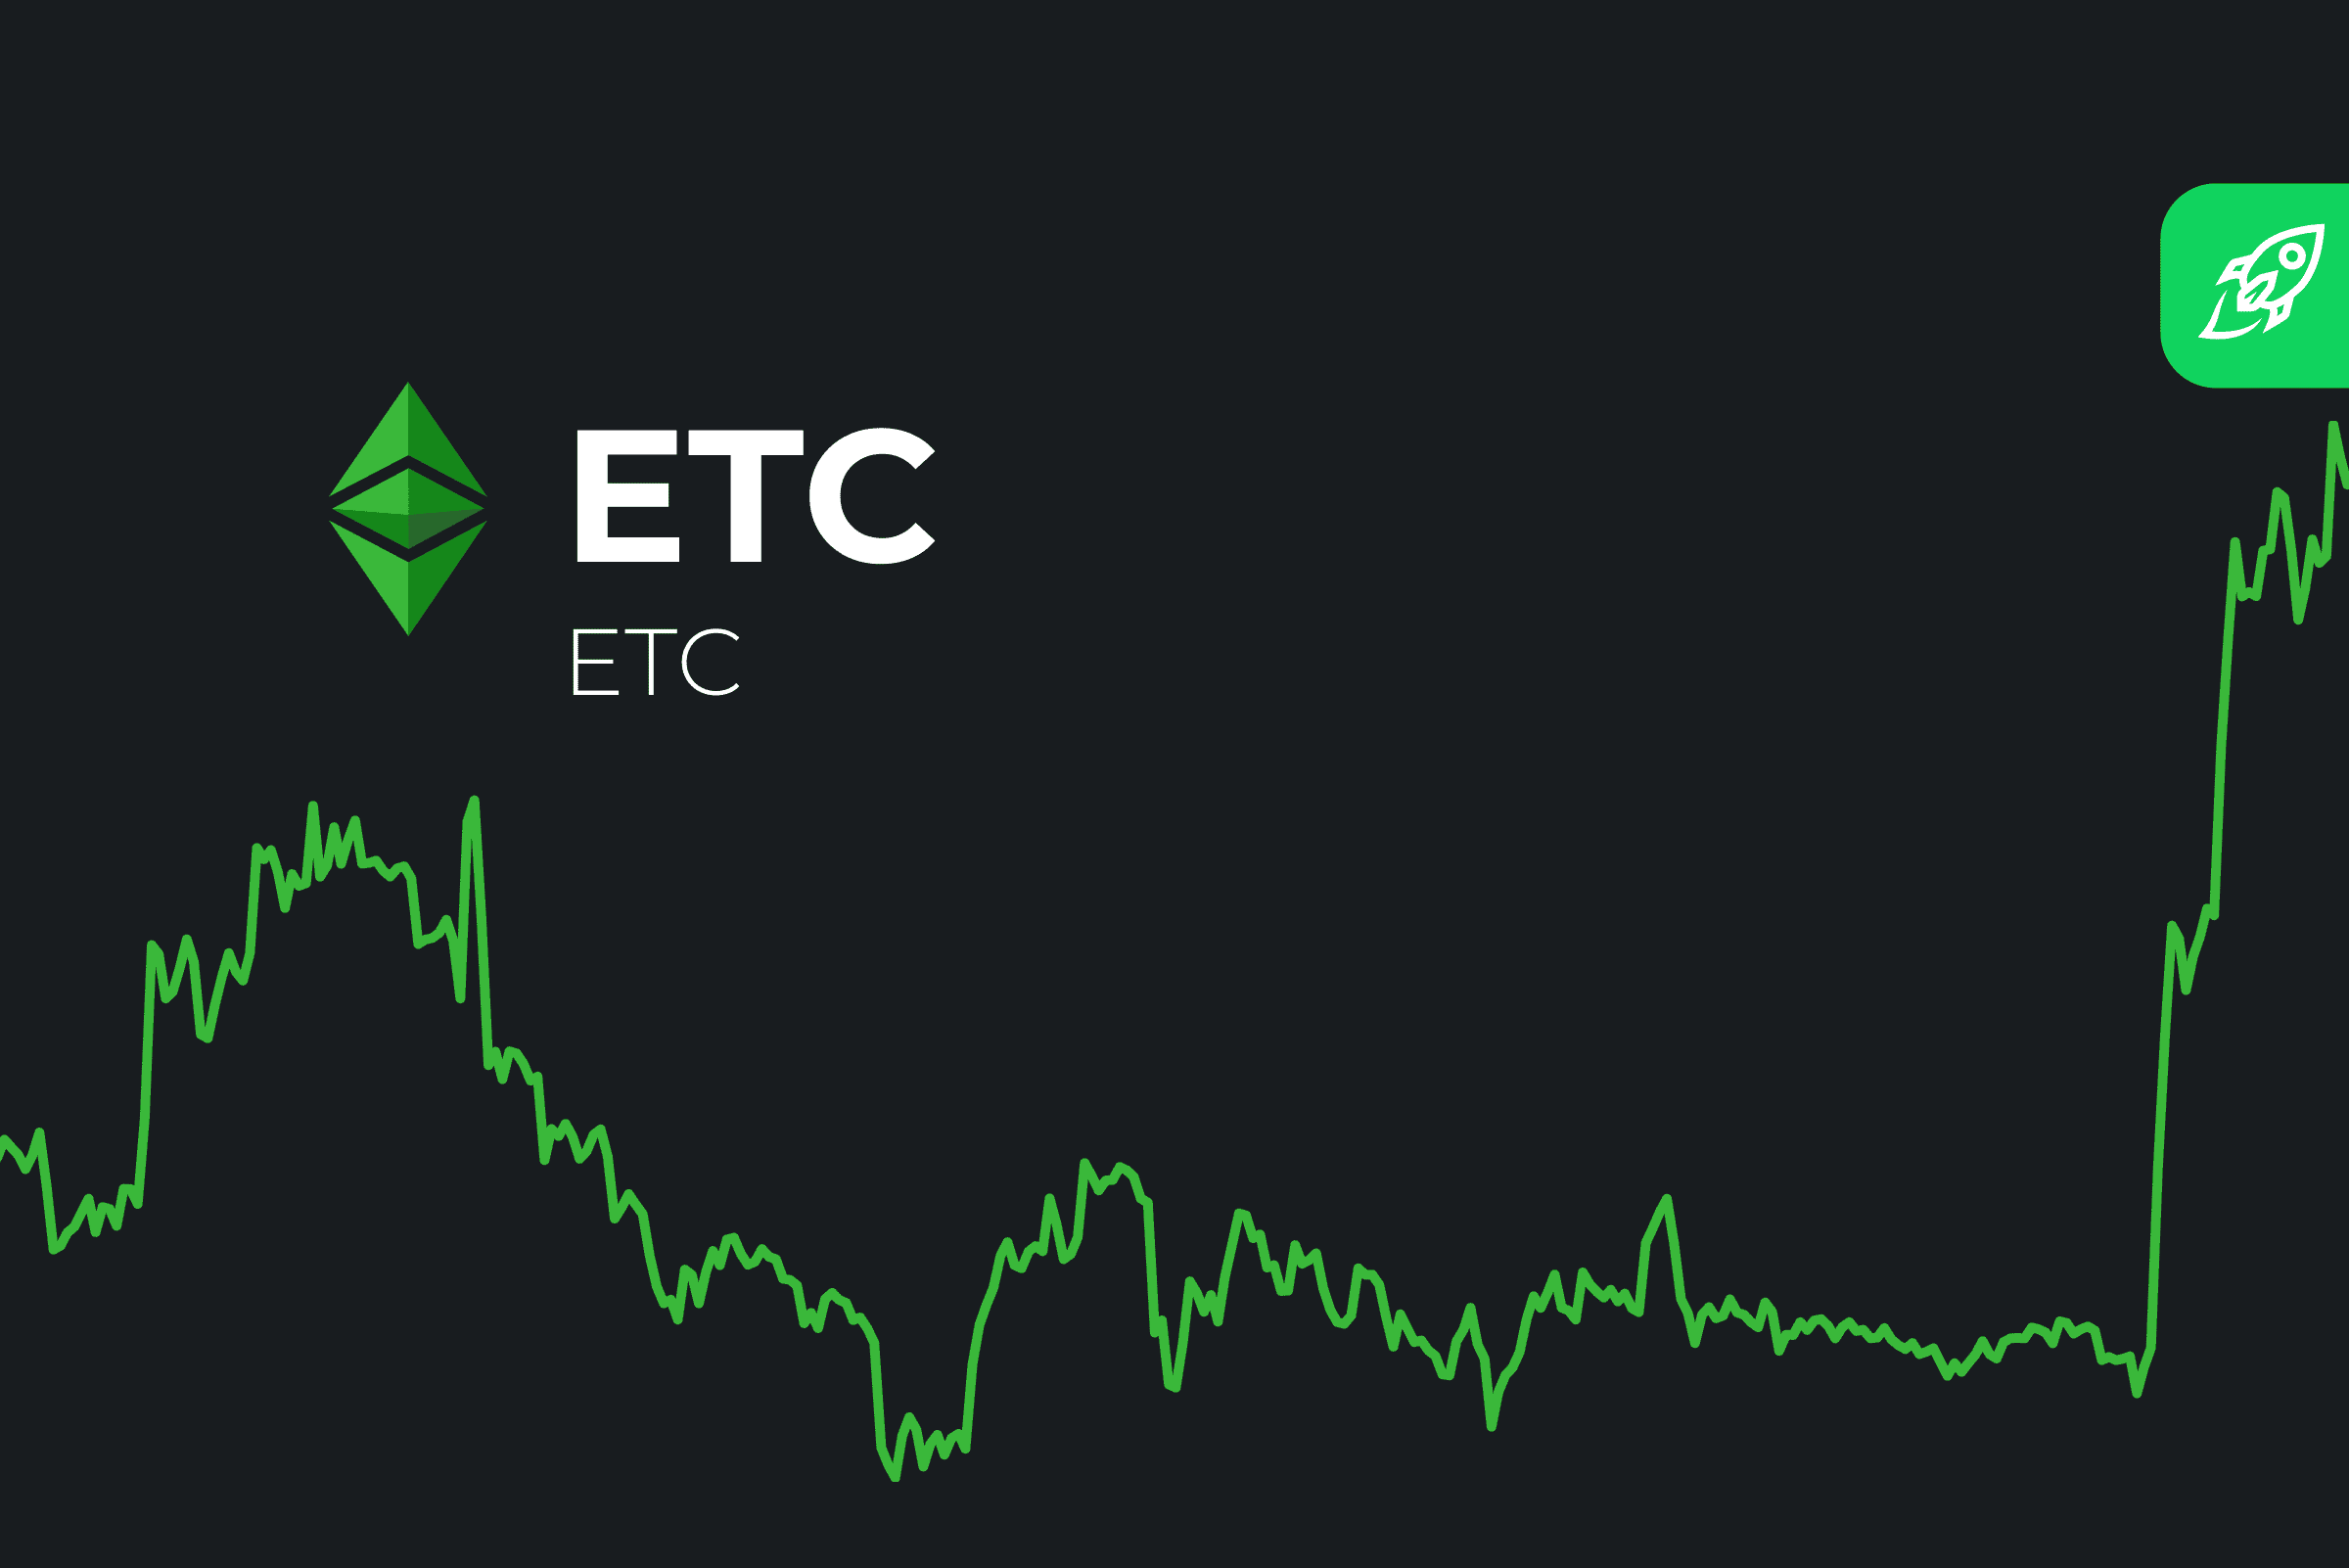 Buy Ethereum Classic - ETC Price Today, Live Charts and News